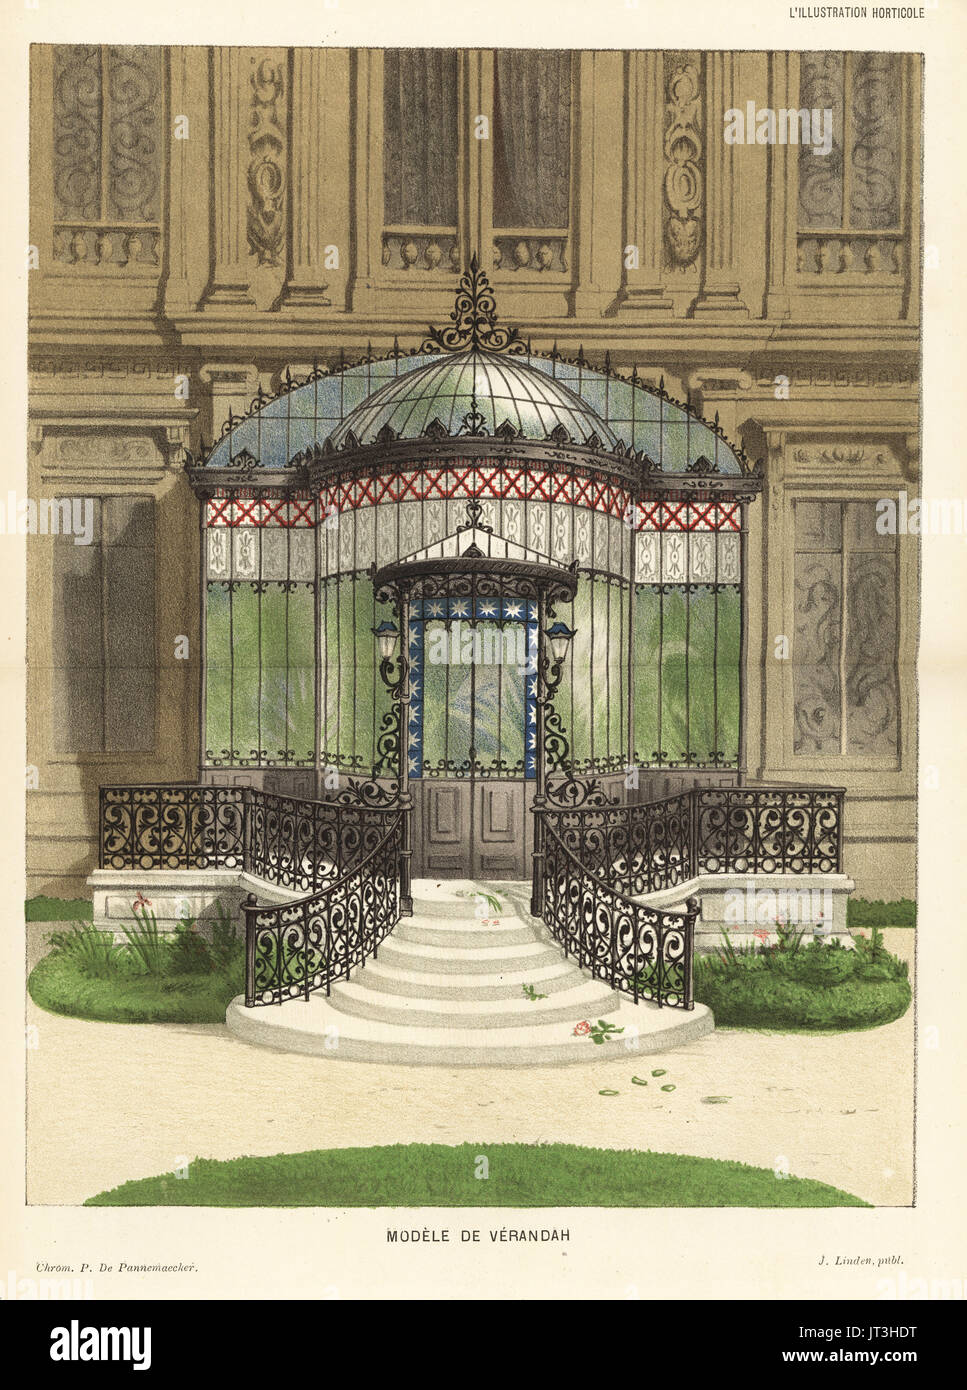 Verandah with stairs and wrought-iron work leading out to a garden. Chromolithograph by Pieter de Pannemaeker from Jean Linden's l'Illustration Horticole, Brussels, 1884. Stock Photo